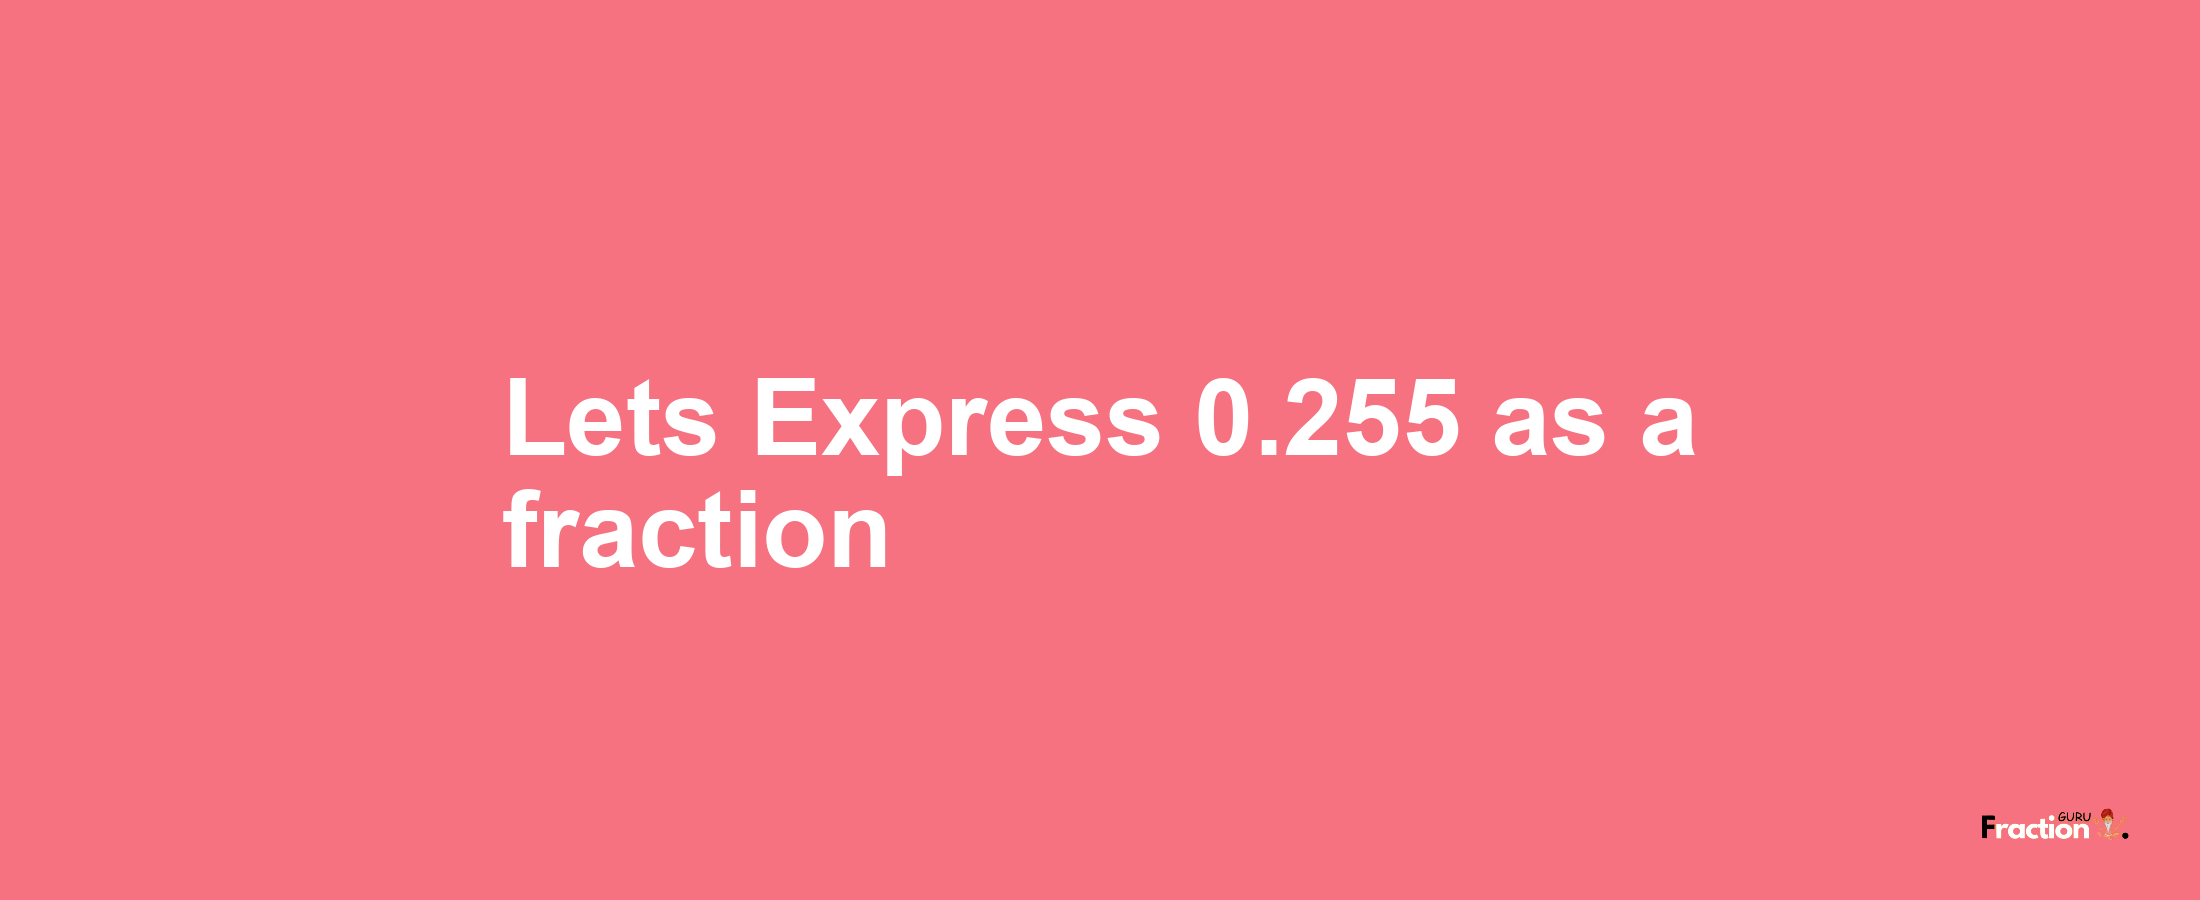 Lets Express 0.255 as afraction